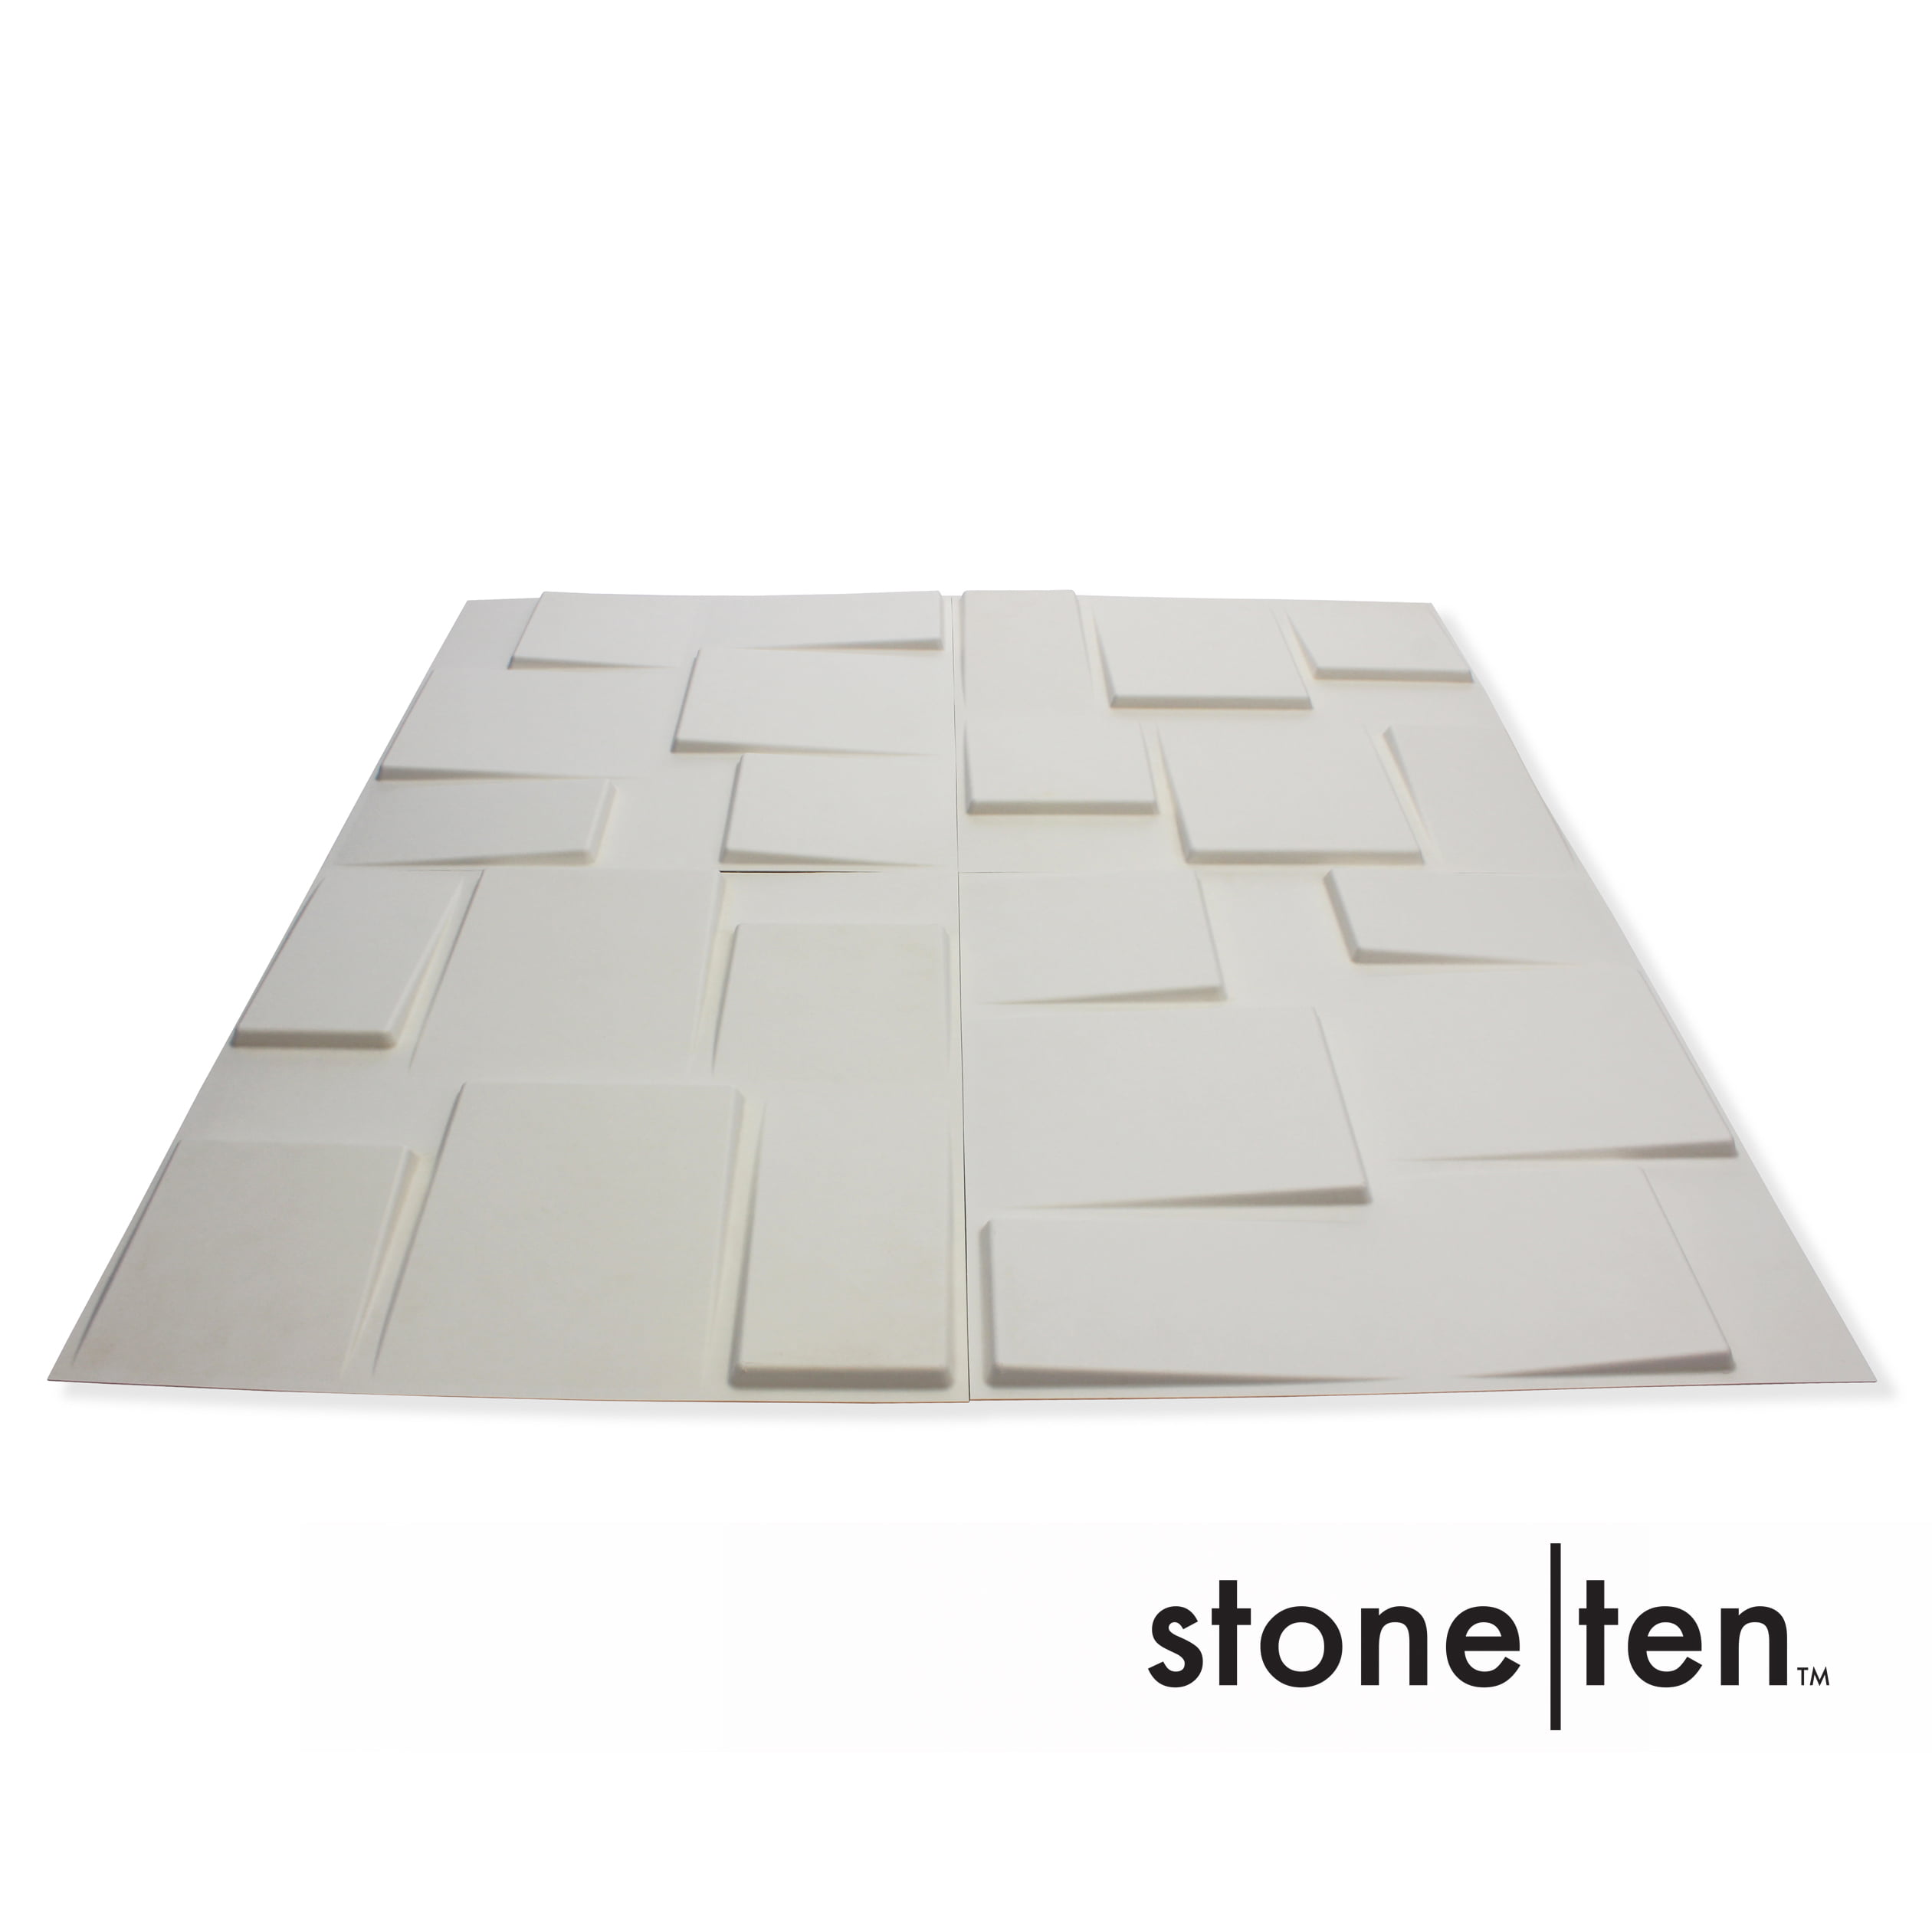 500MM X 500MM Acoustic Foam Tiles Self Adhesive Backed in white x 36 tiles 